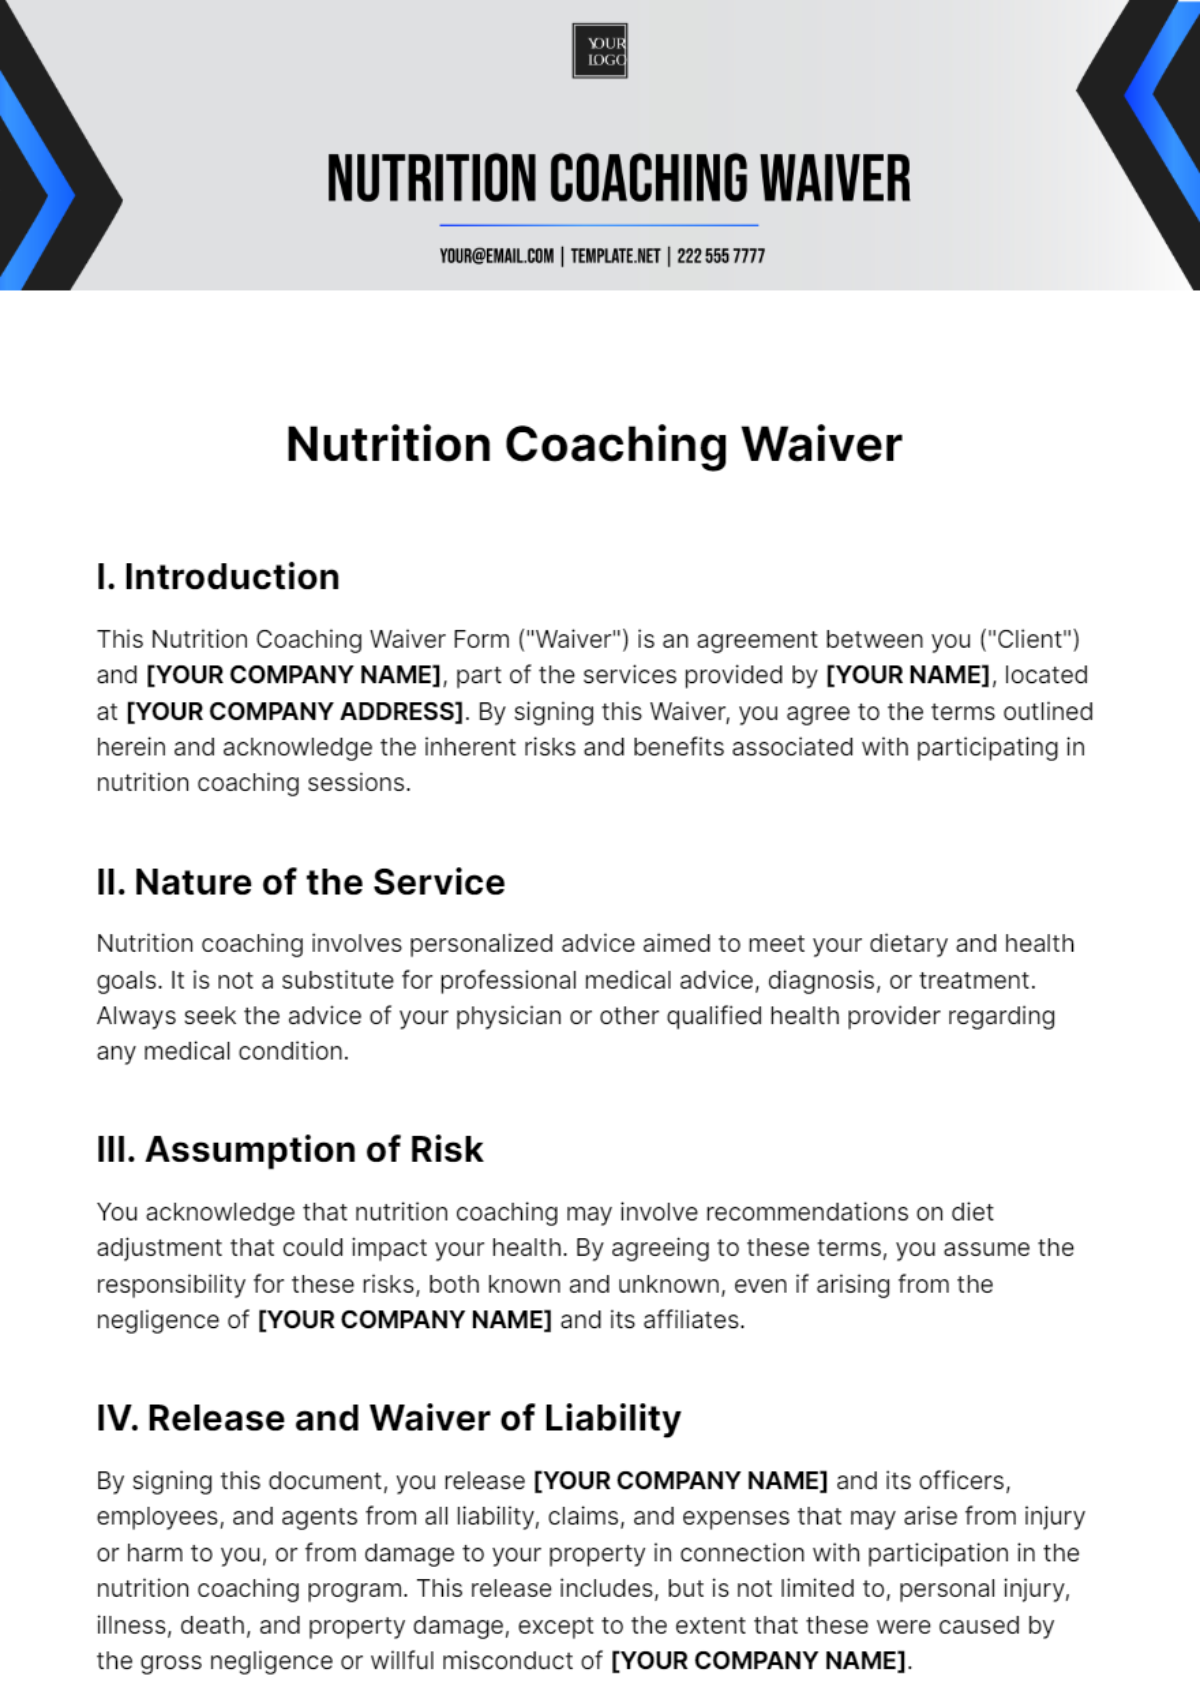 Nutrition Coaching Waiver Template